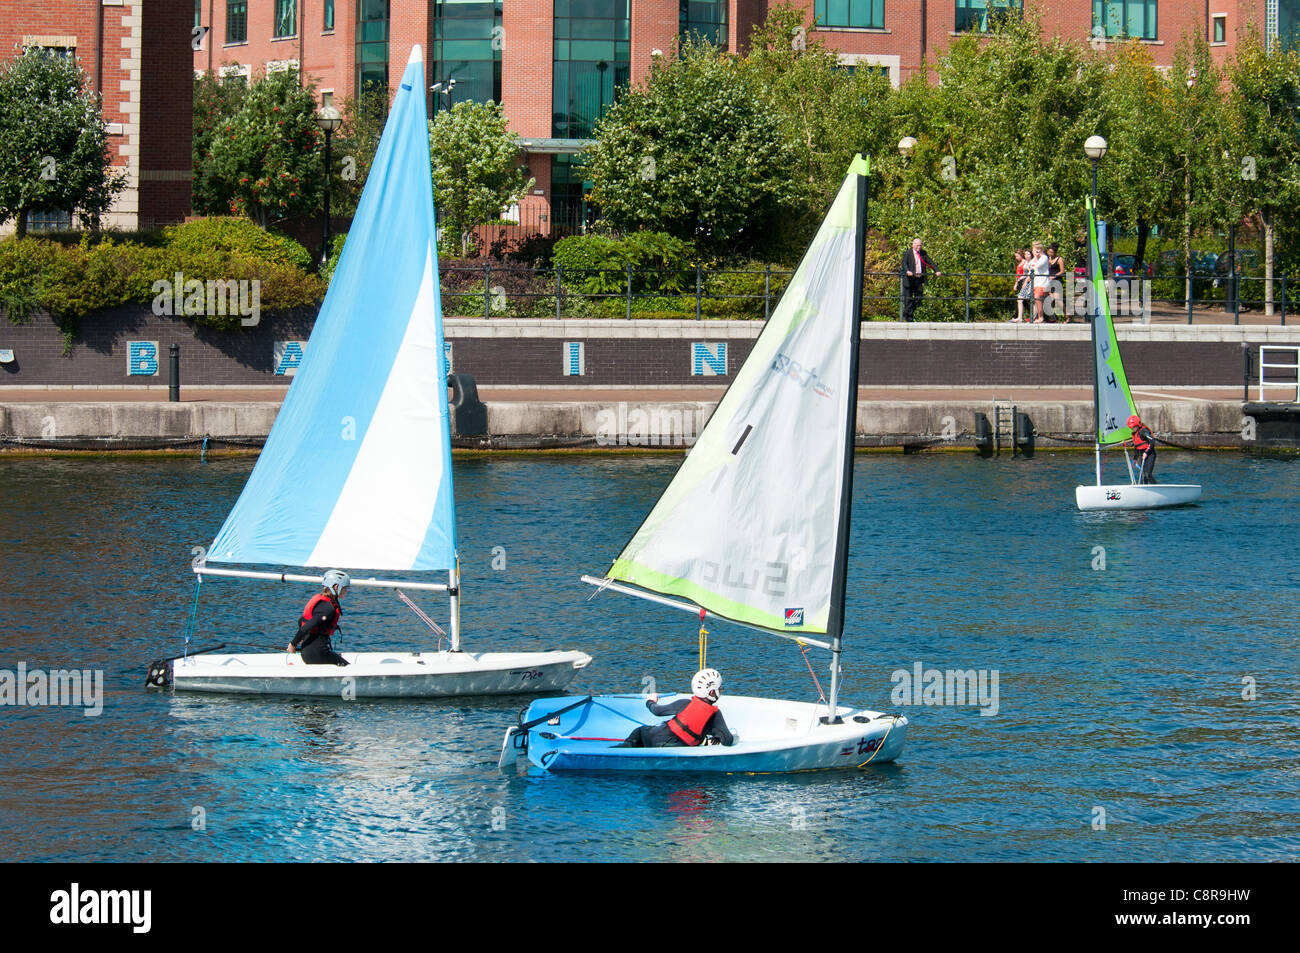 Children practicing sailing at the Watersports Centre, Salford Quays, Manchester, England, UK Stock Photo